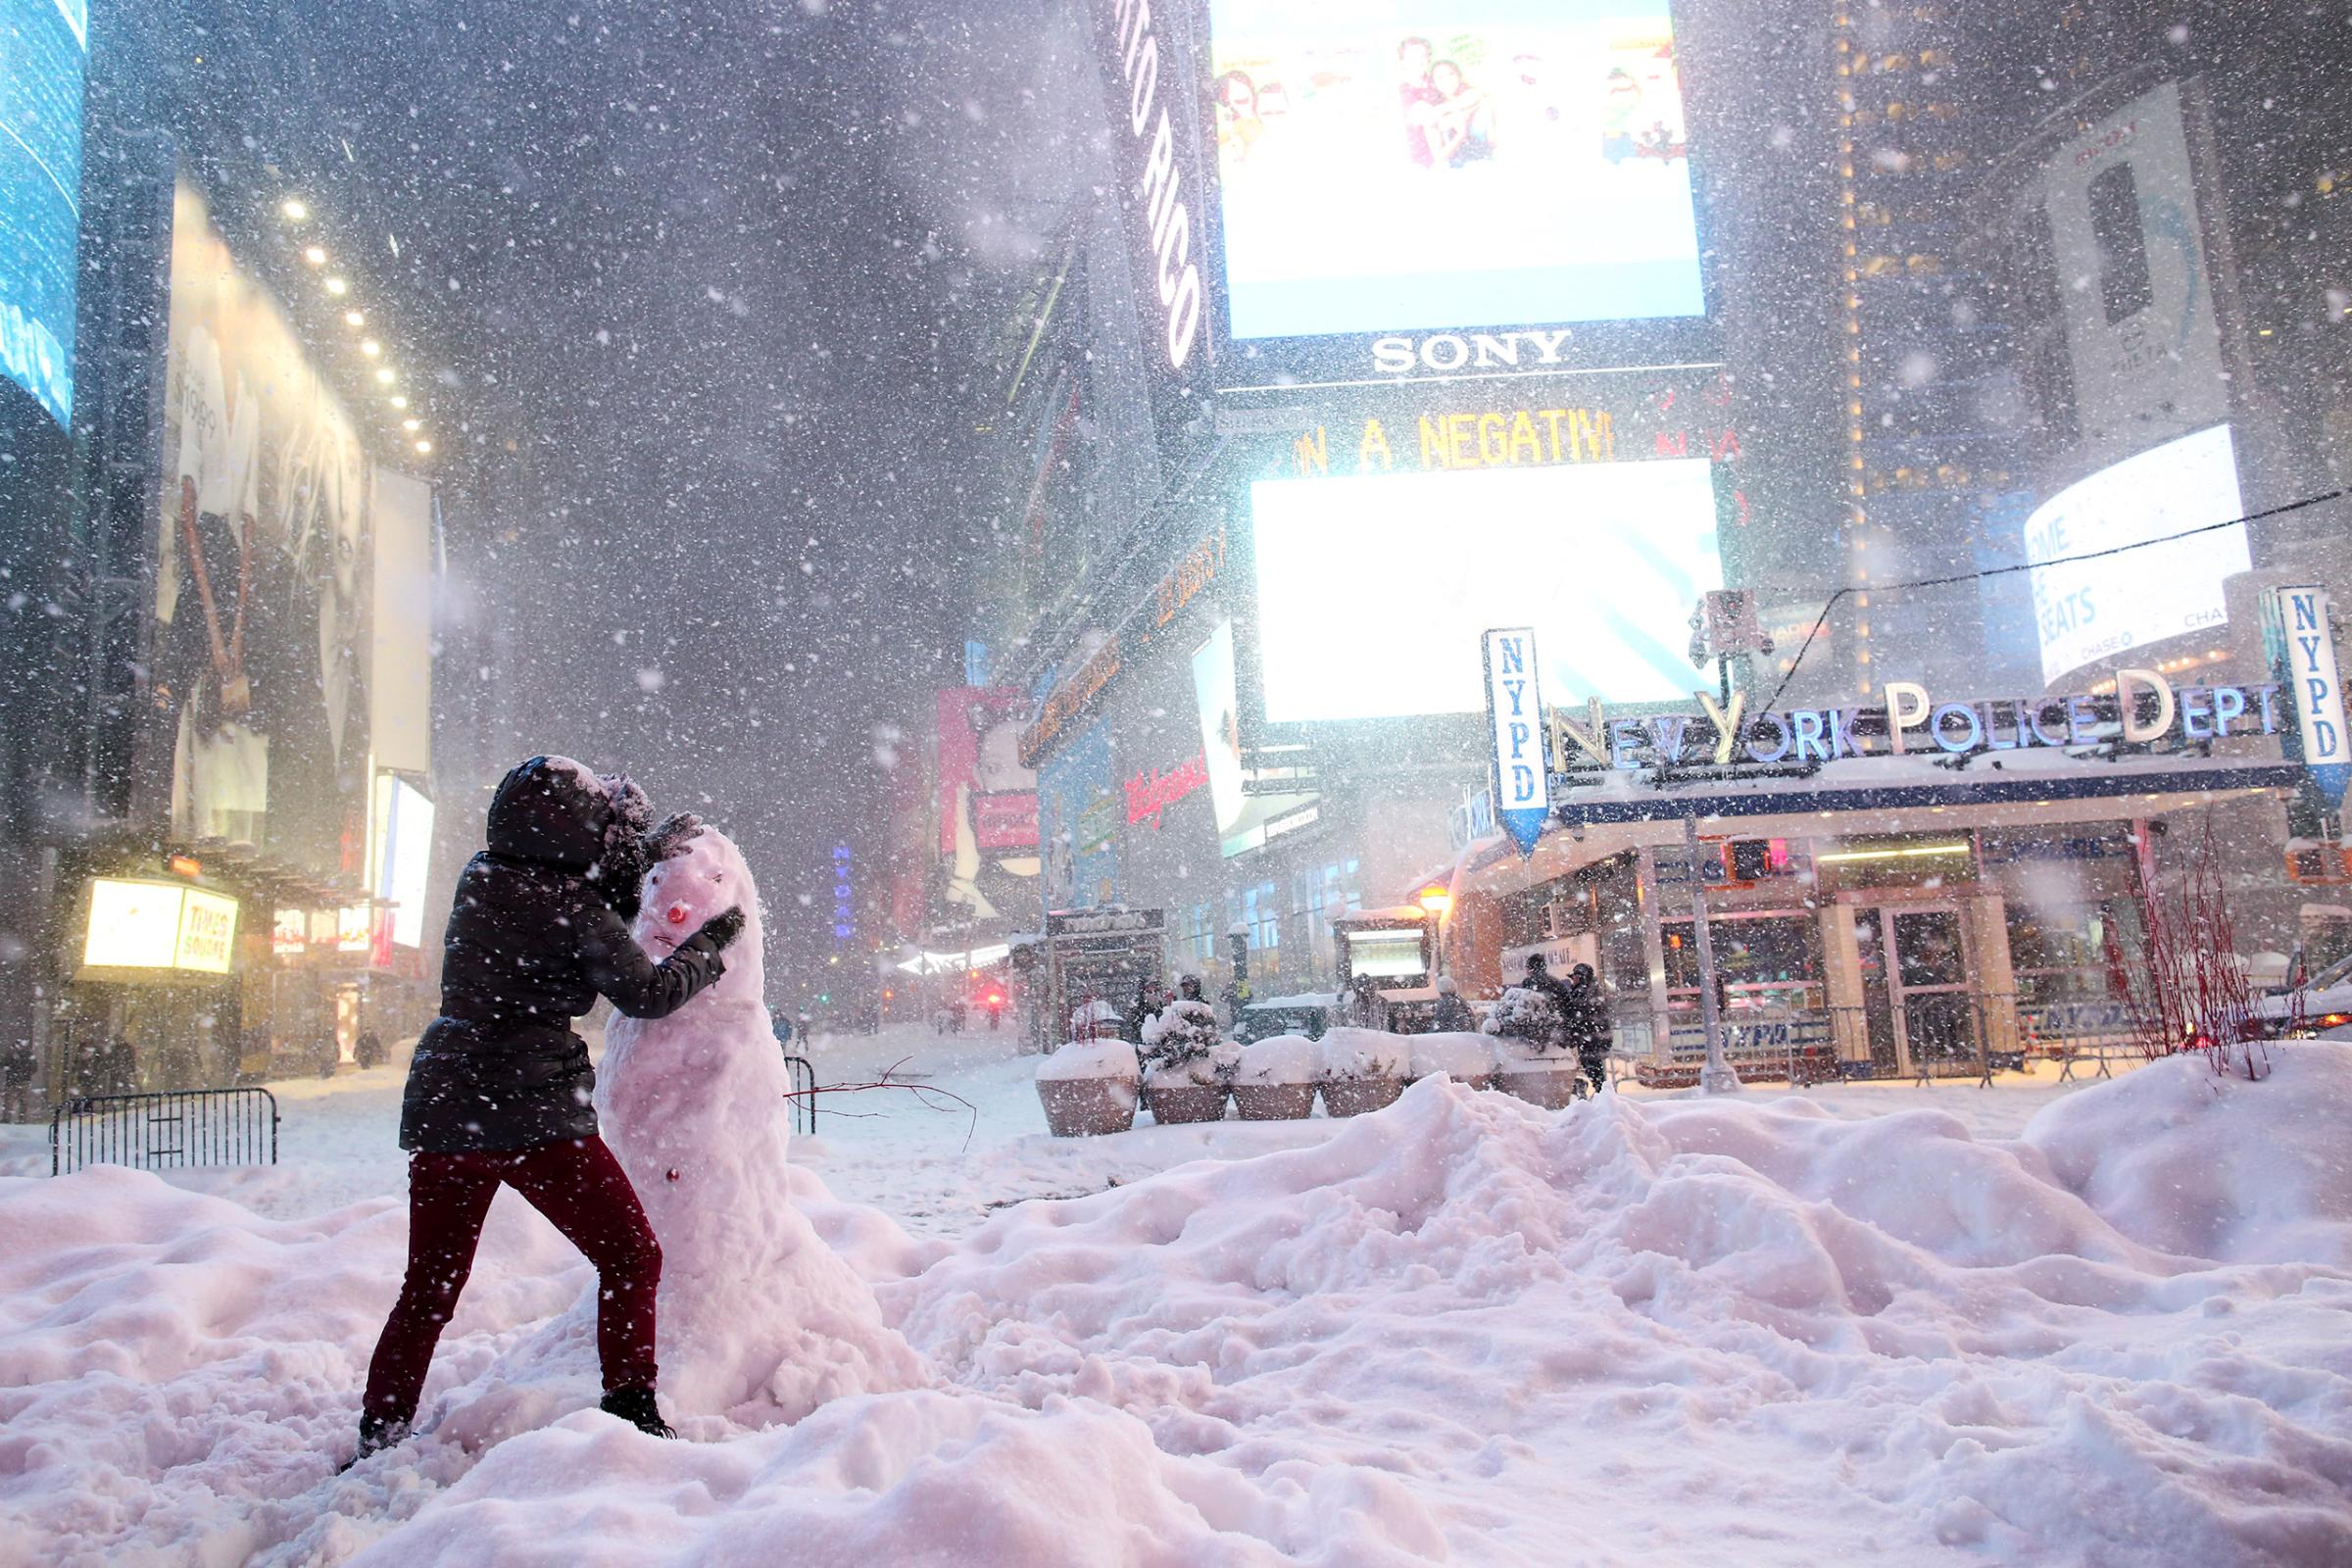 A woman decorates a snowman in Times Square as all cars but emergency vehicles are banned from driving on the road in New York City on Jan. 23, 2016.